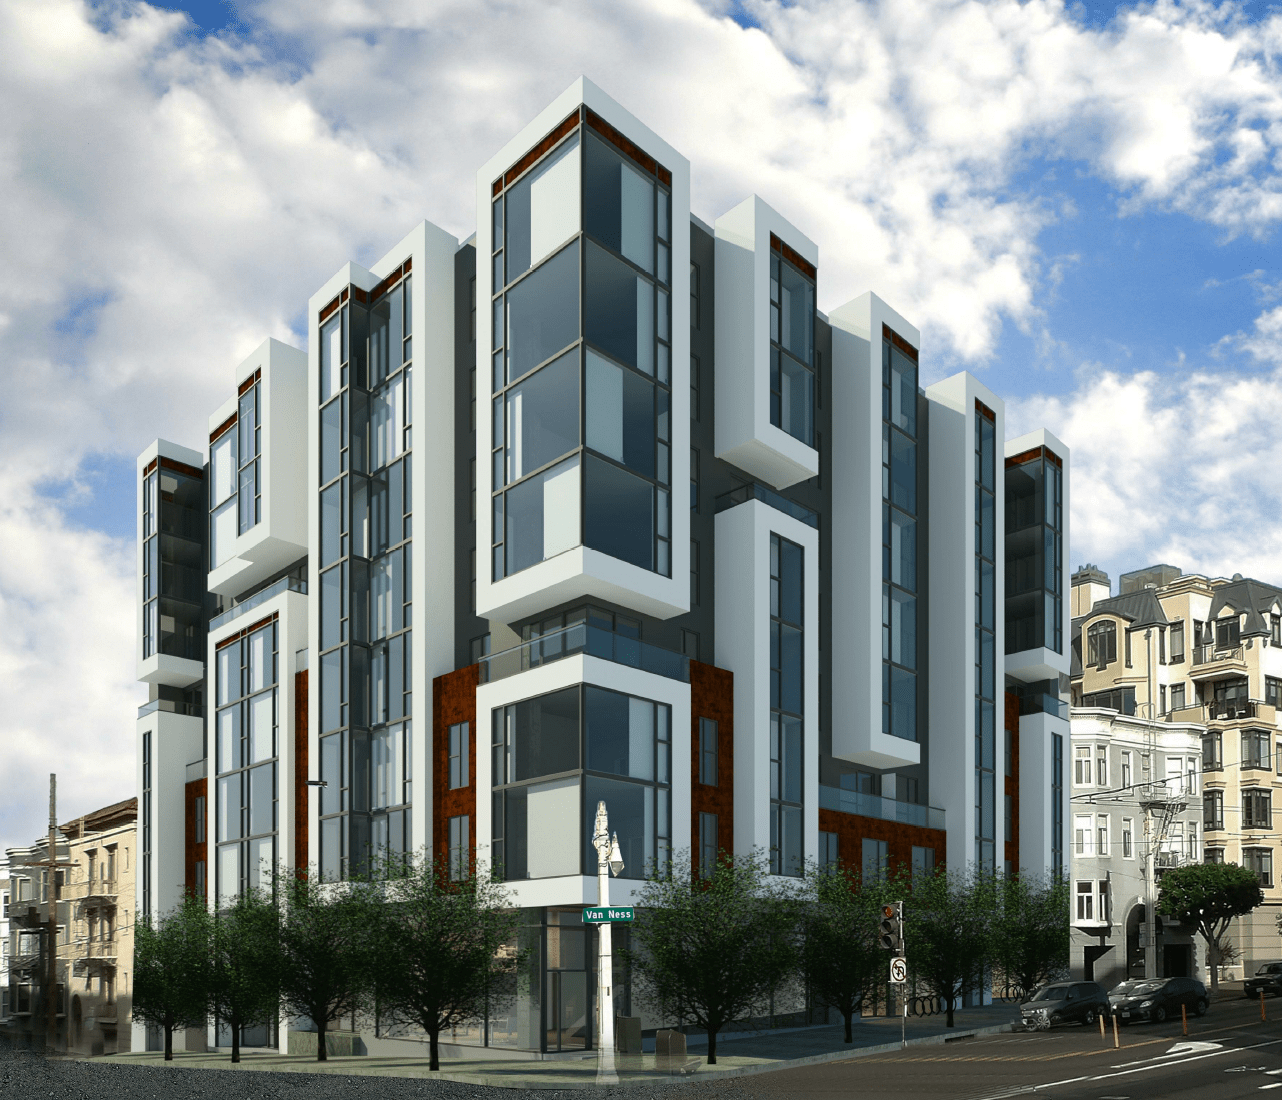 An architectural rendering shows a planned apartment building